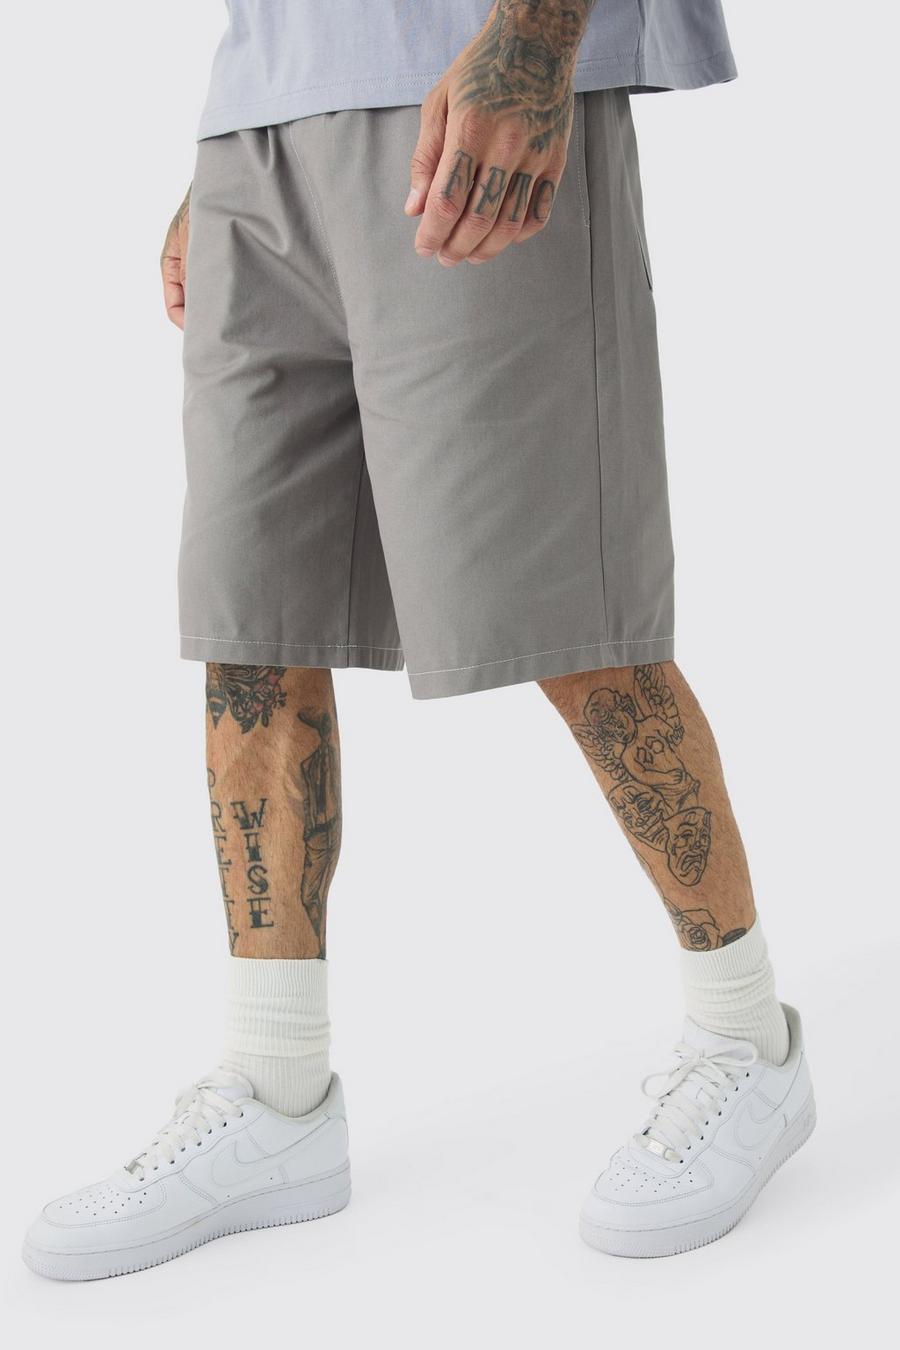 Grey Tall Elasticated Waist Relaxed Twill Contrast Stitch Shorts